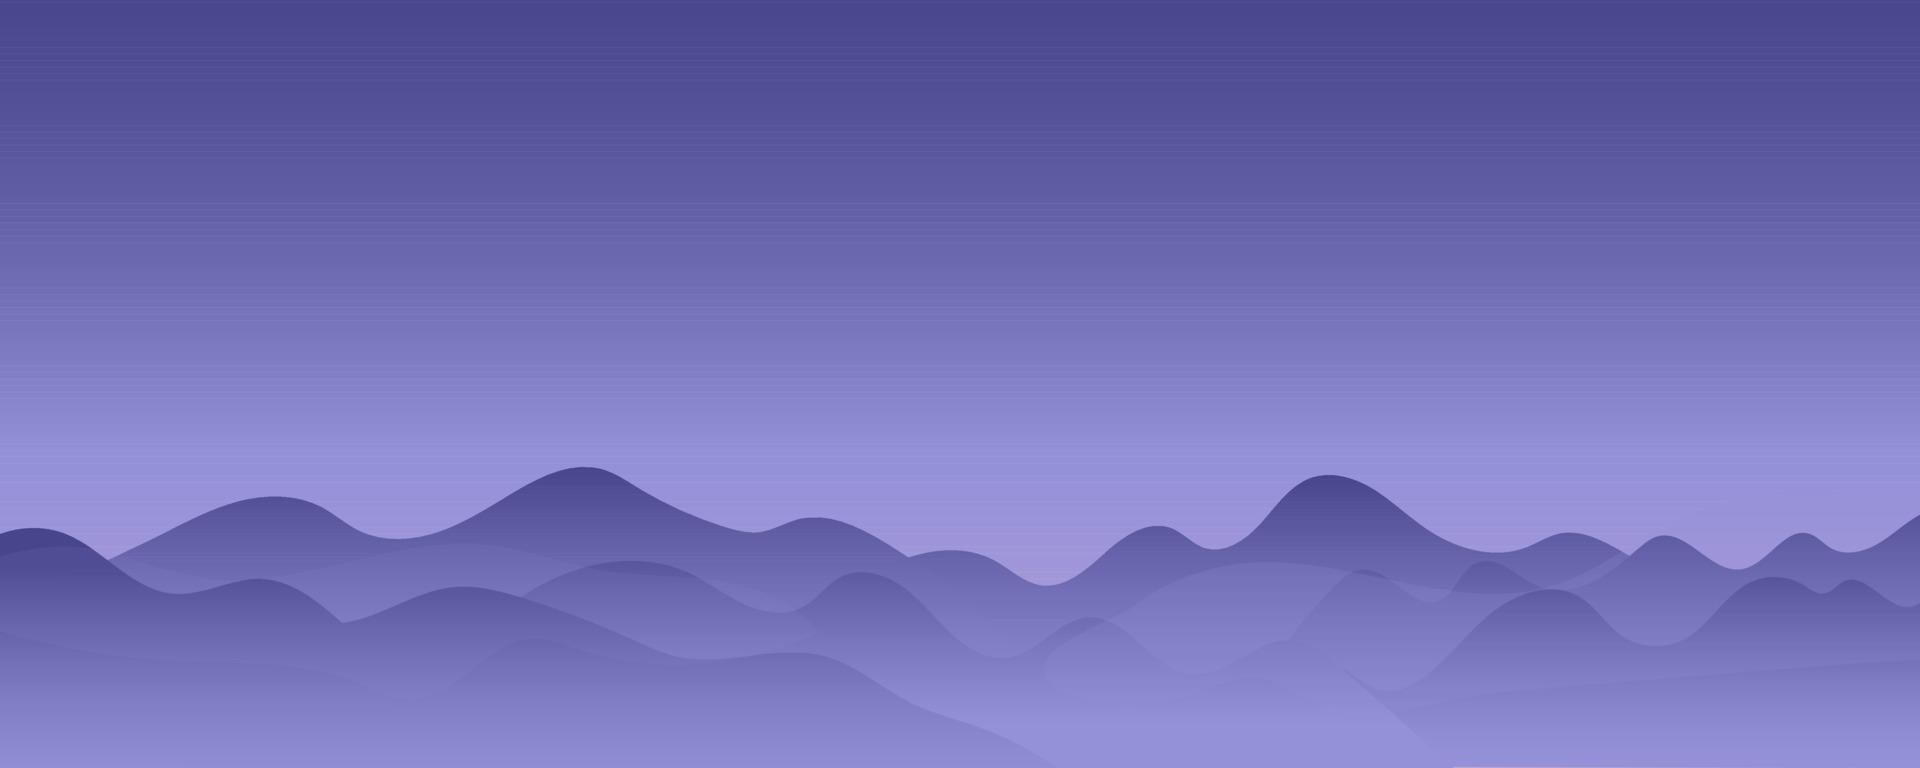 violet purple mountain landscape vector background abstract. vector illustration. flat very peri brings monochrome mountain hill panoramic scenery vector background